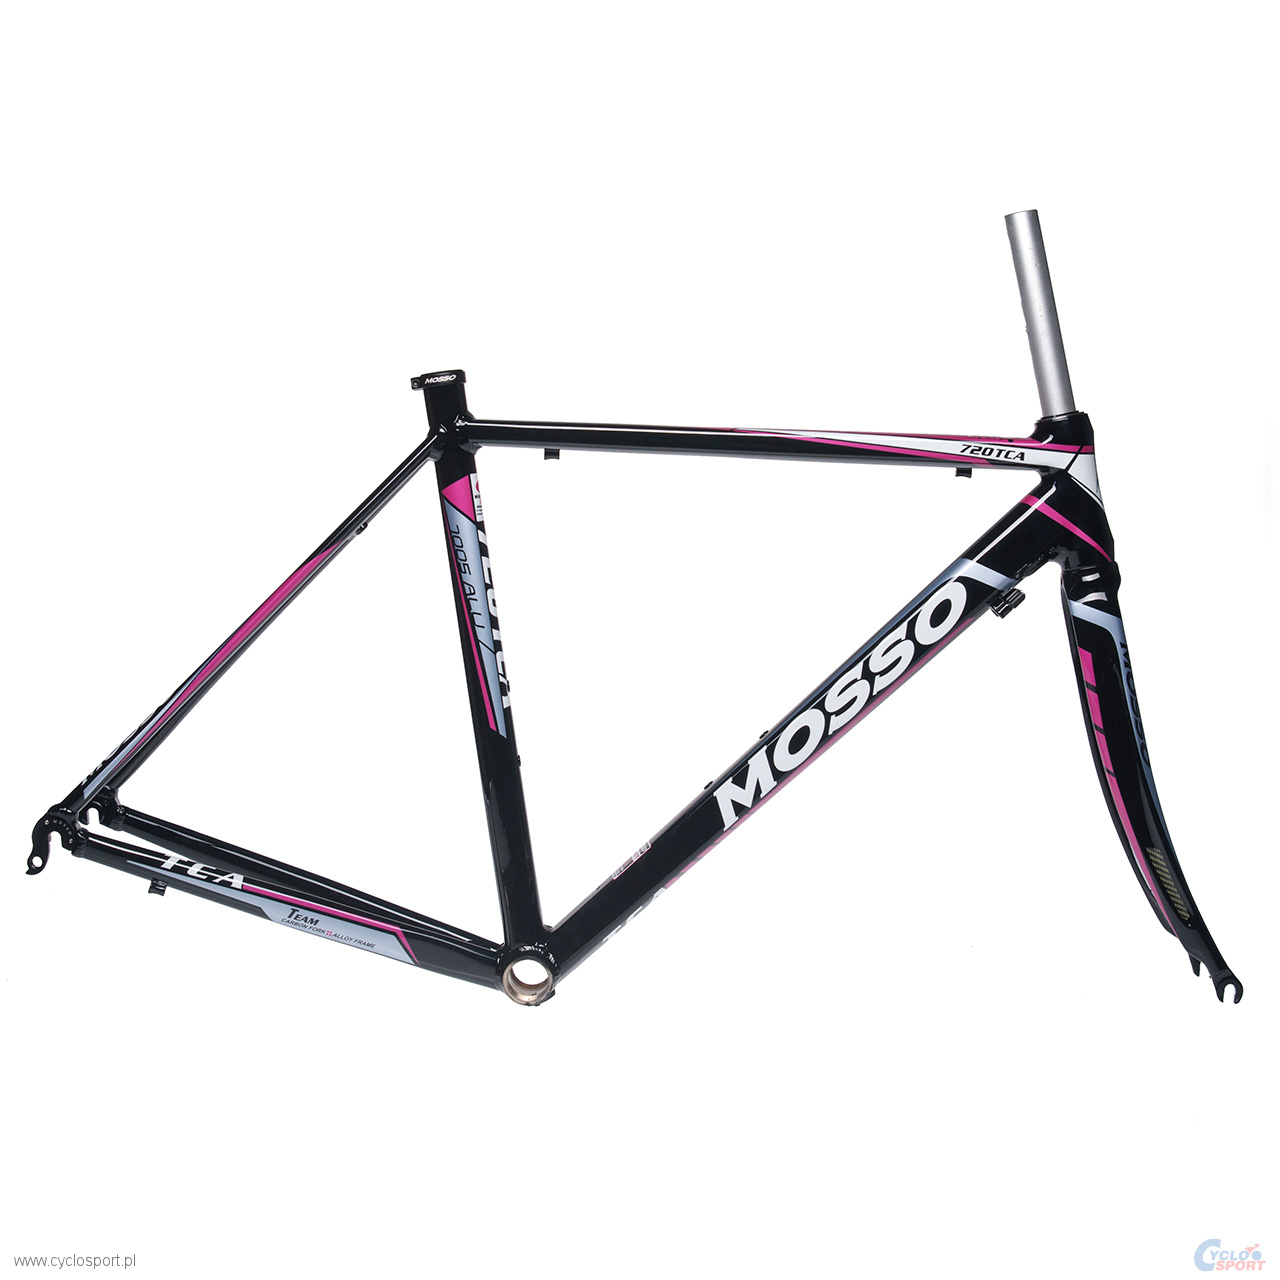 FRAME ROAD MOSSO 720TCA with CARBON FORK Size : 510 mm